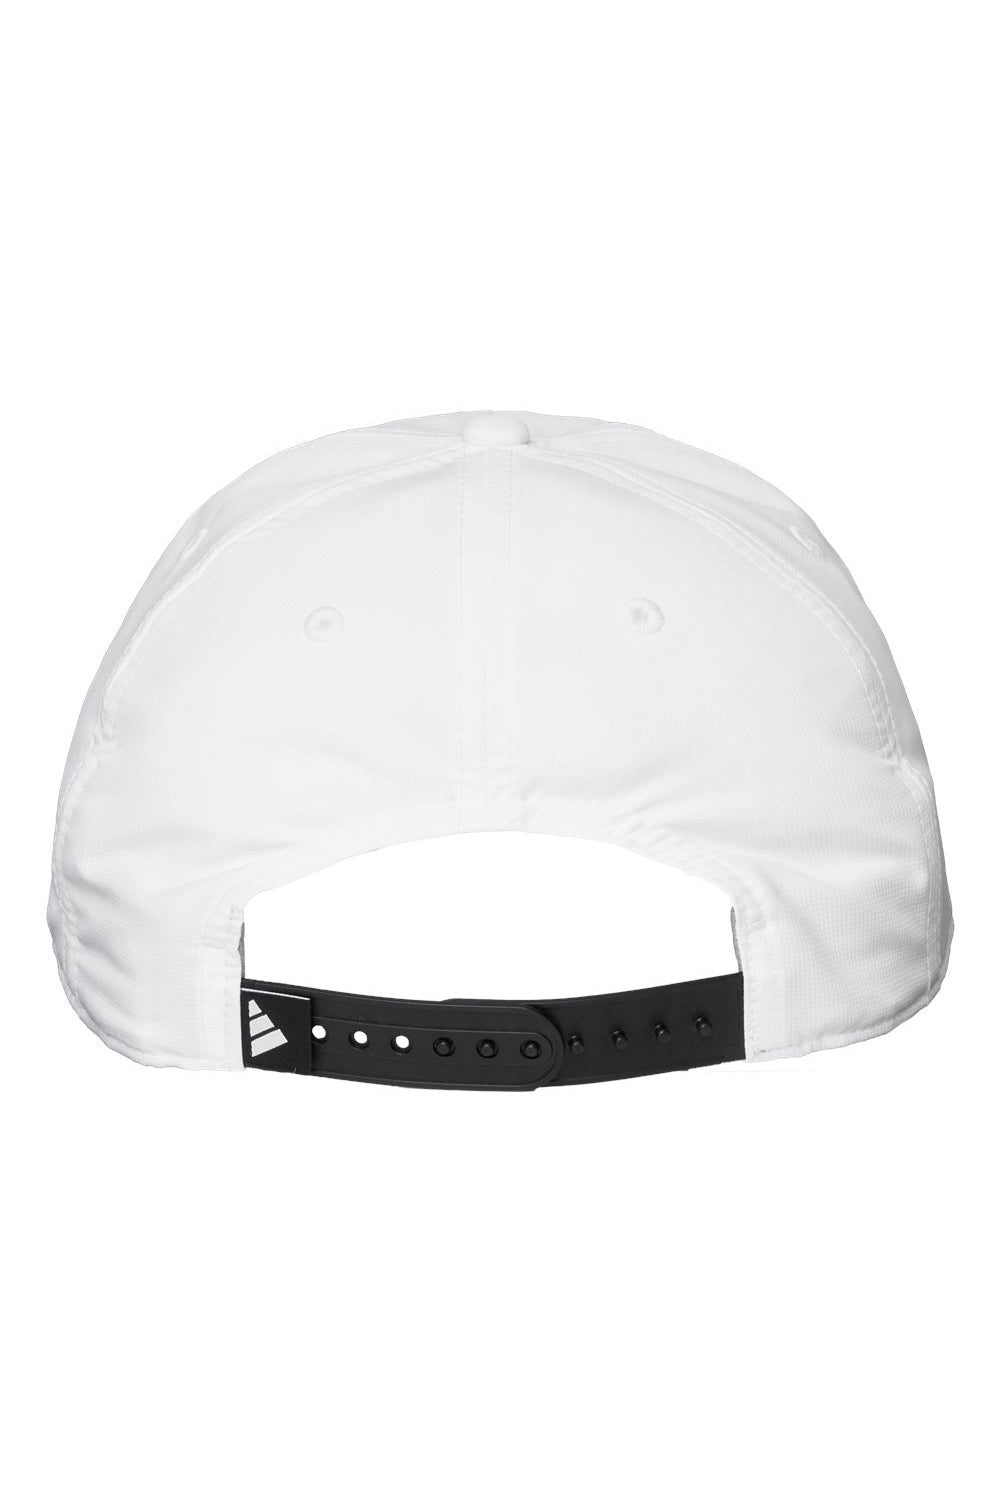 Adidas A600S Mens Sustainable Performance Max Moisture Wicking Snapback Hat White Flat Back